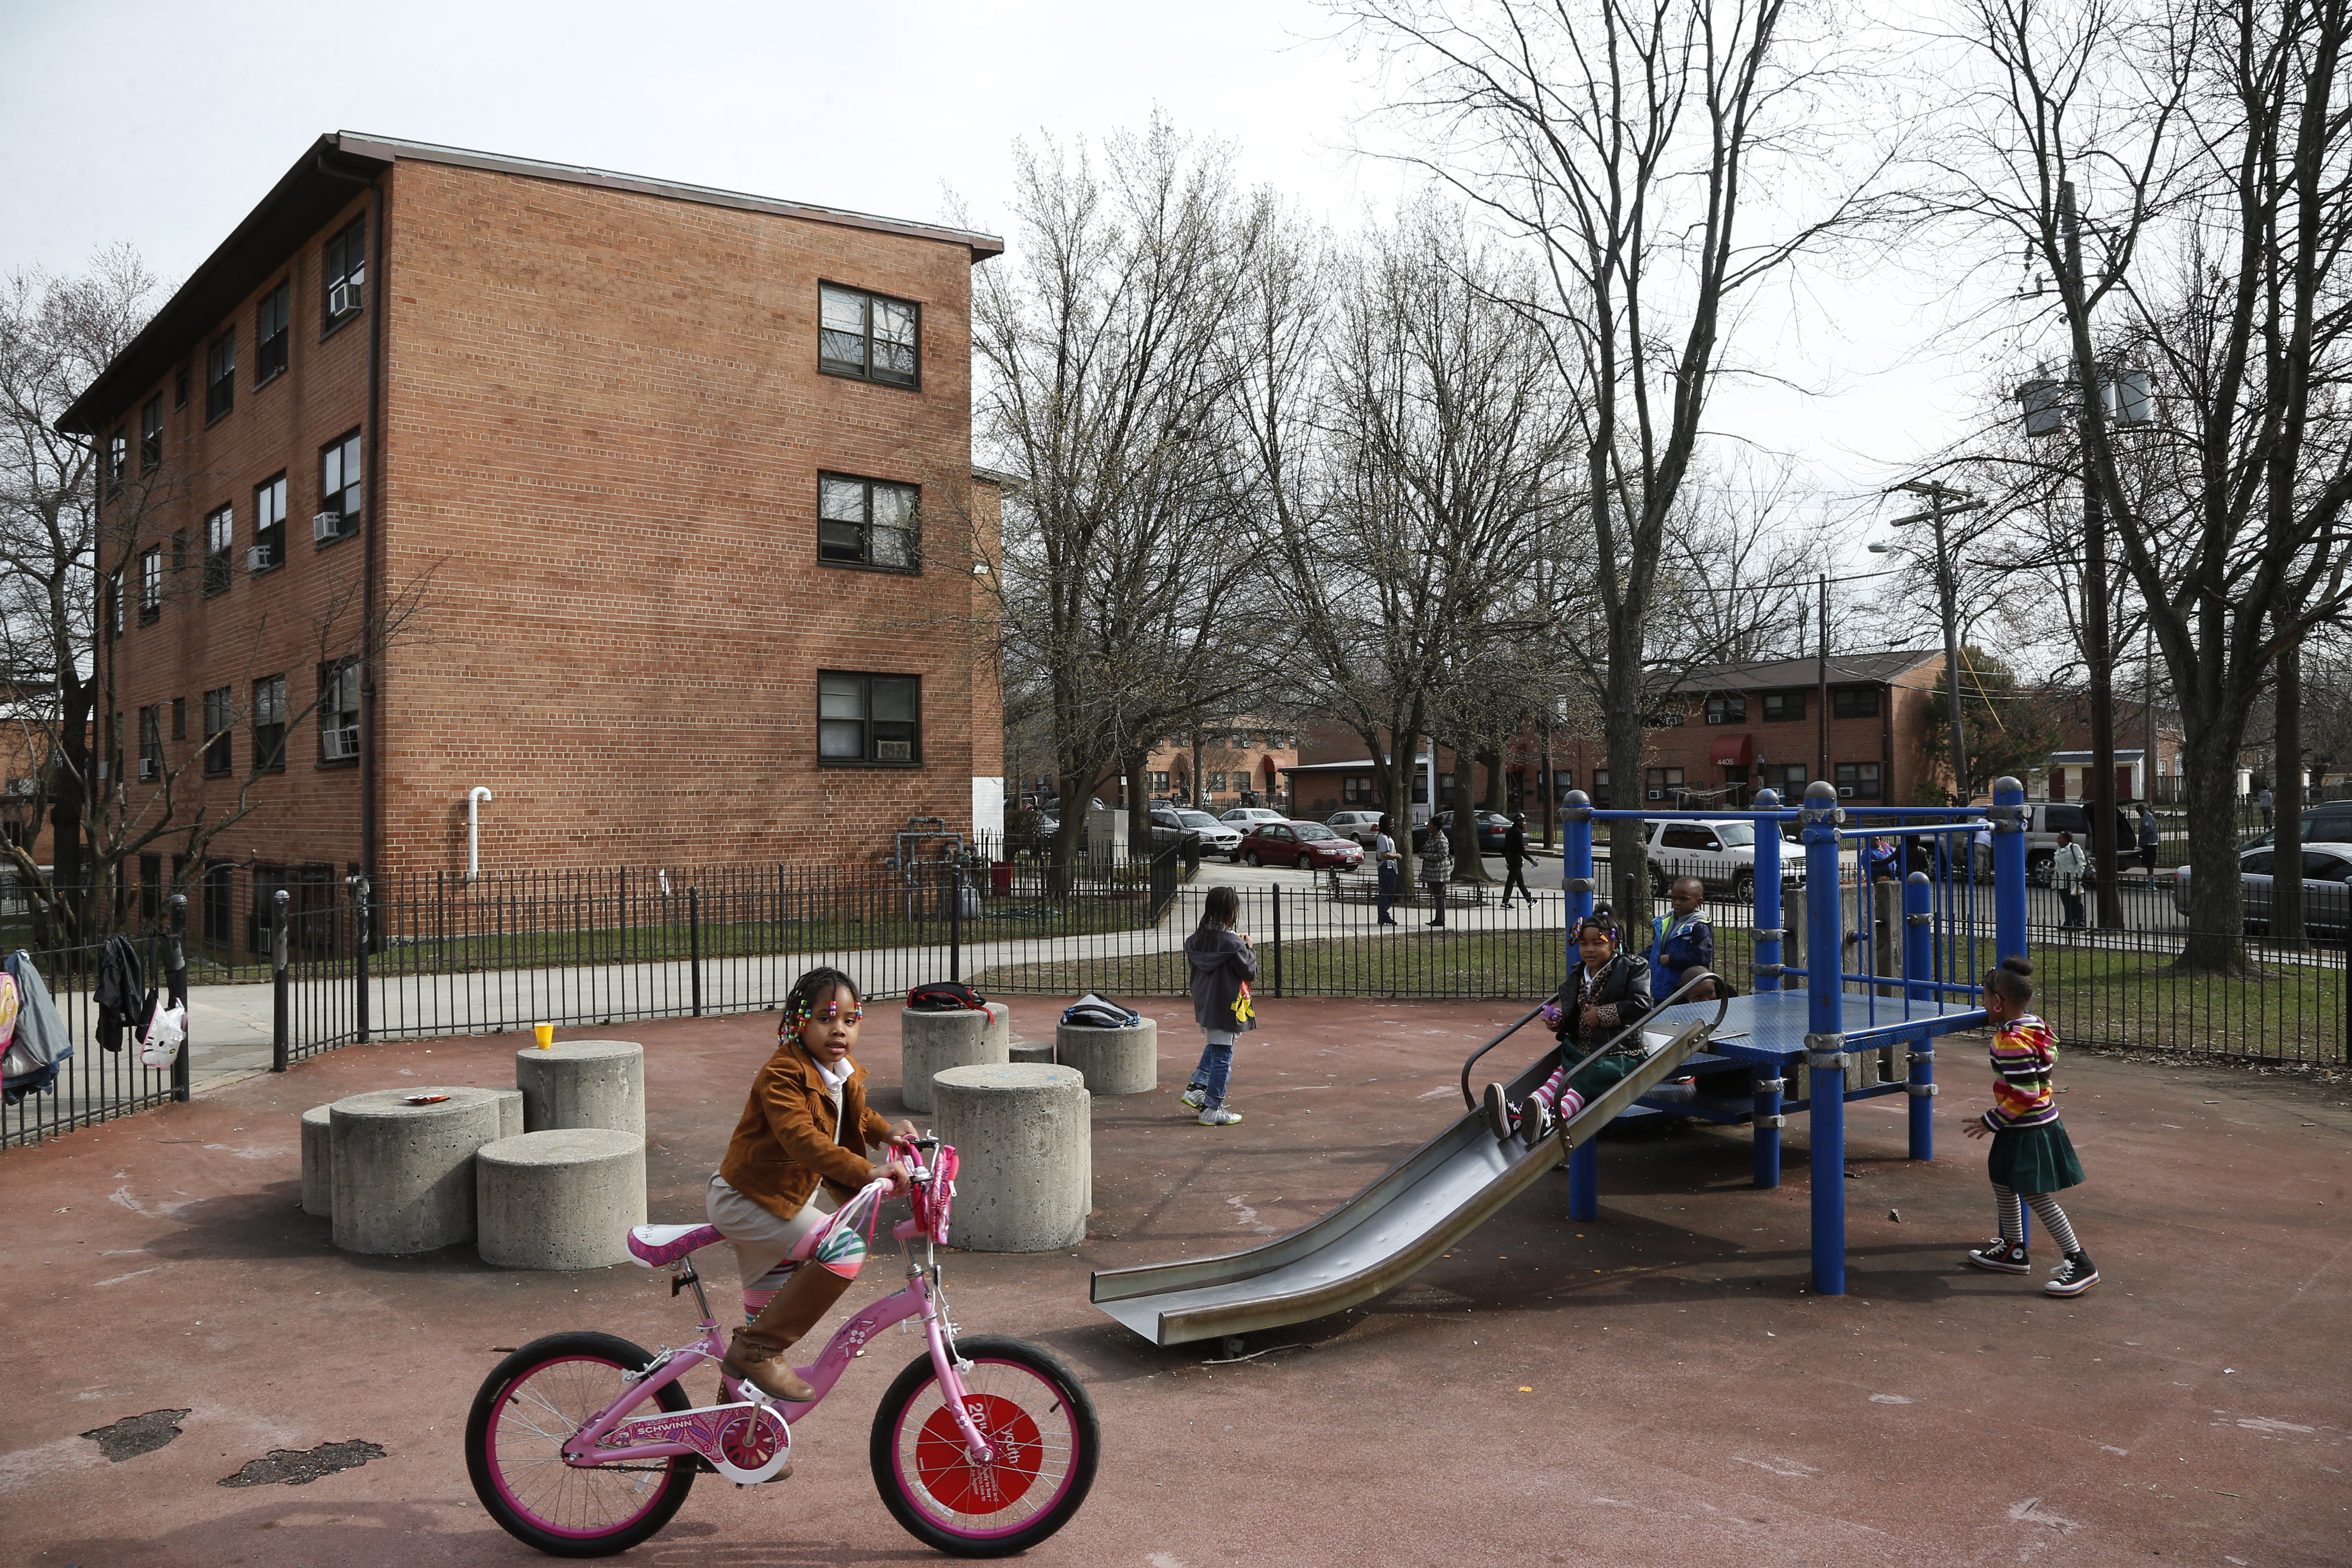 The Democratic Socialists of America have mounted a tenants’ rights campaign in Washington, DC. This photo taken April 2, 2014 shows children playing in the Kenilworth-Parkside neighborhood.